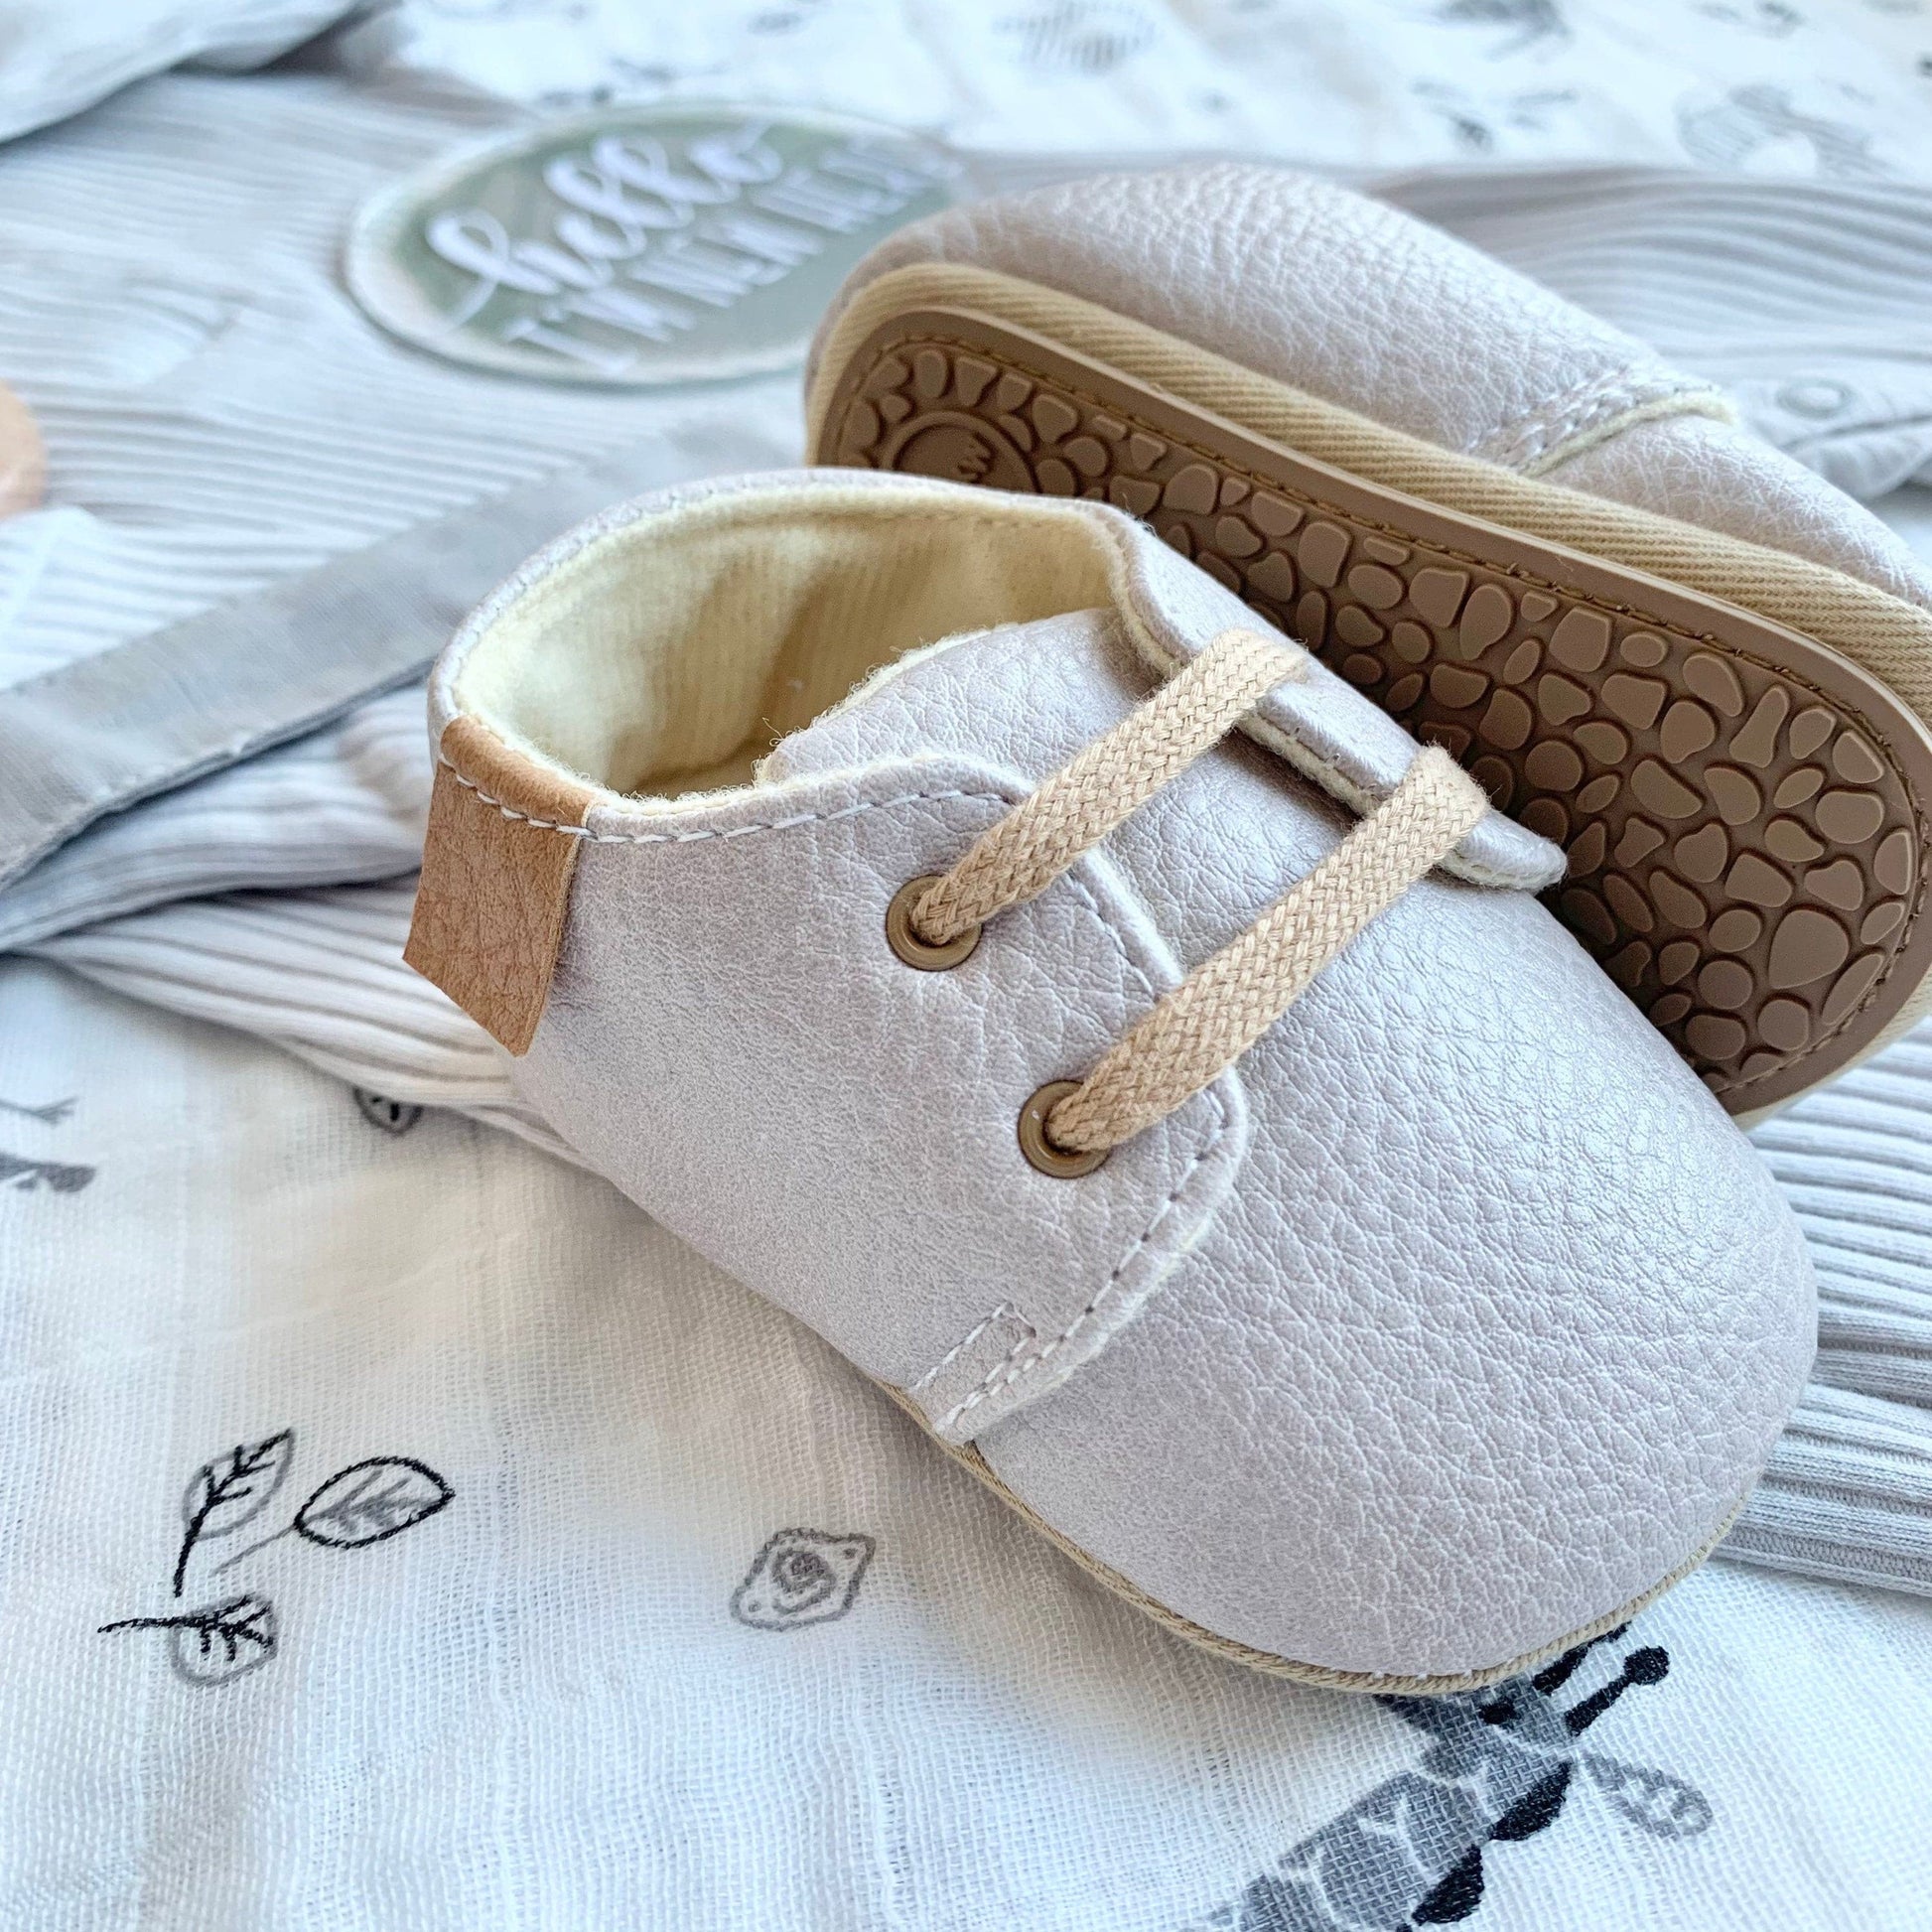 Gender Neutral Baby Gift Box Set - Grey Baby Blanket, Soother Clip and Shoes.